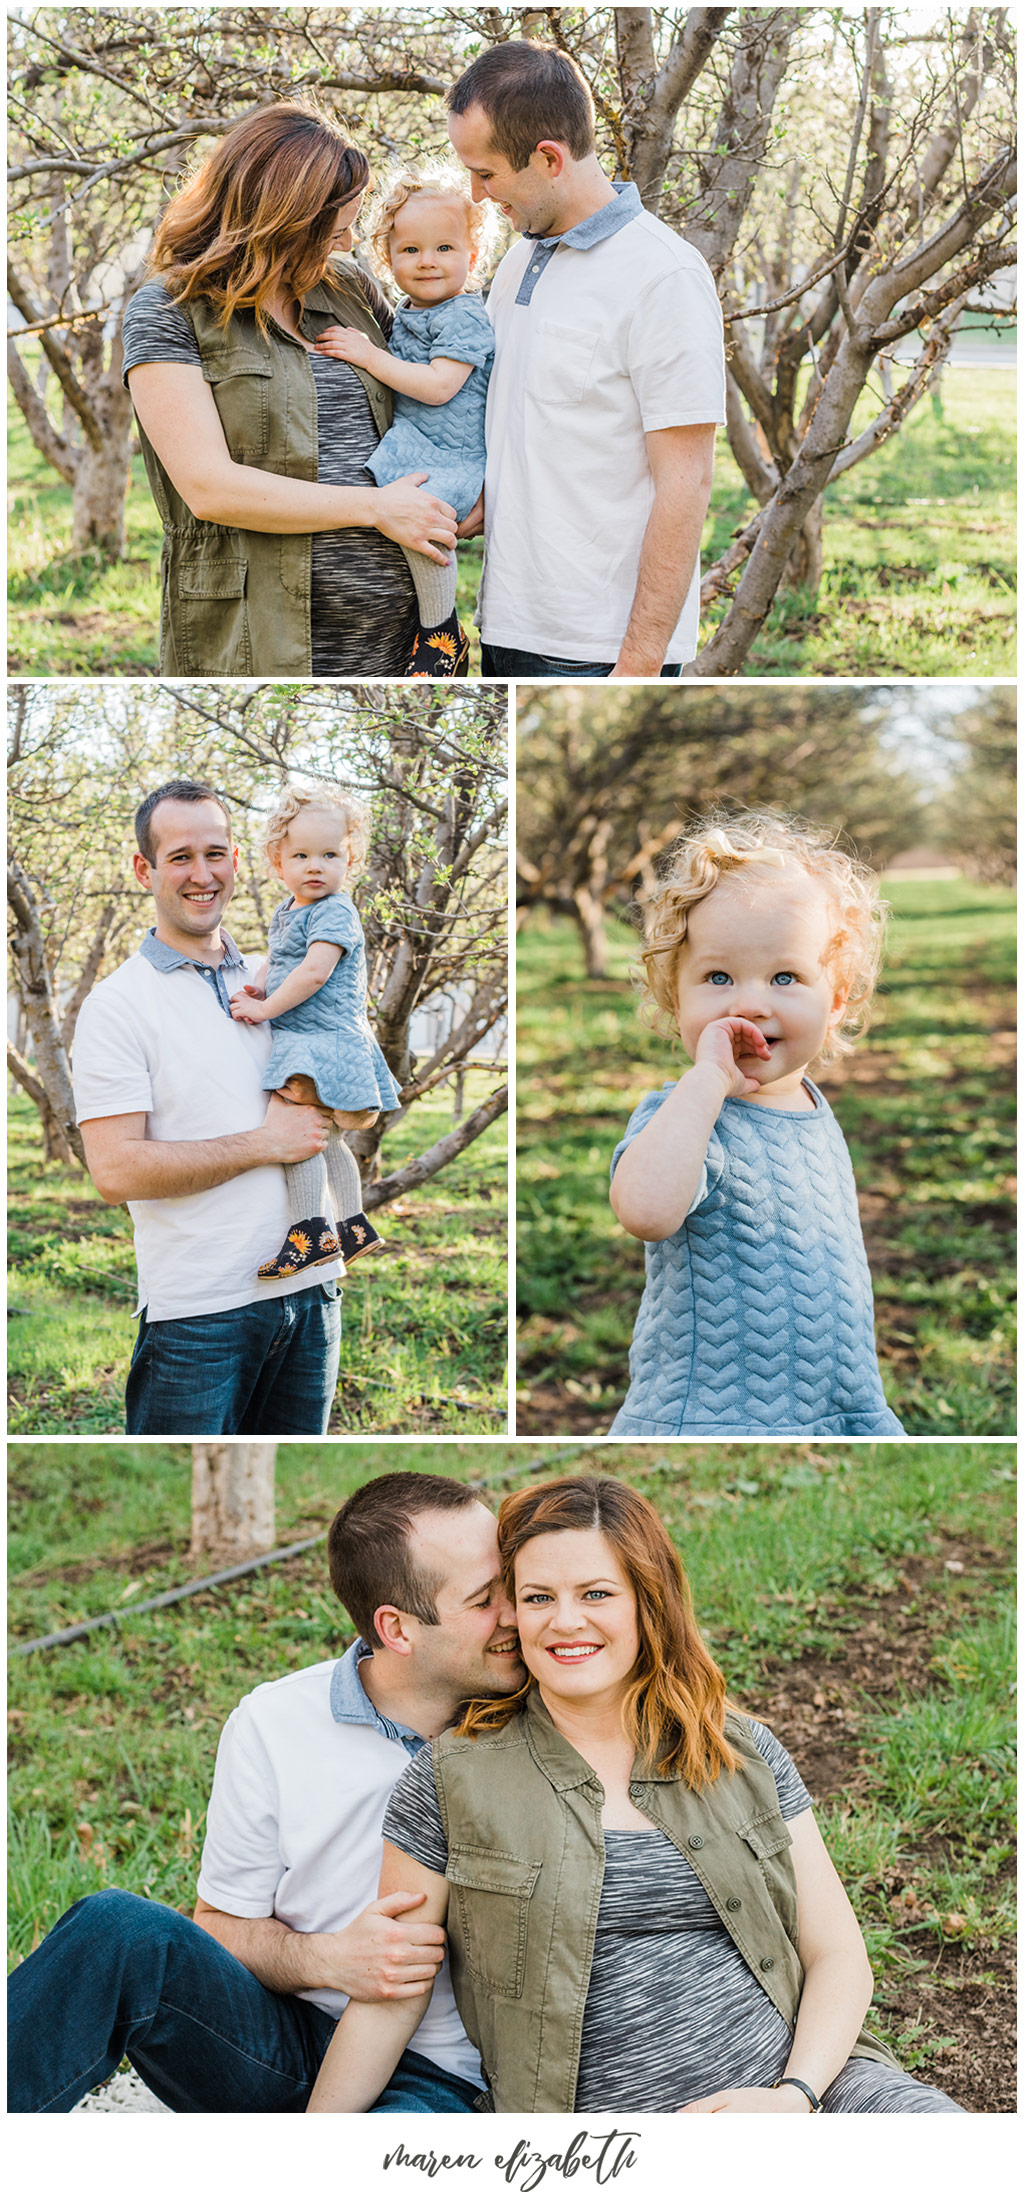 Family Pictures in a Spring Orchard. Maternity Family Pictures with Toddler | Arizona Family Photographer | Maren Elizabeth Photography